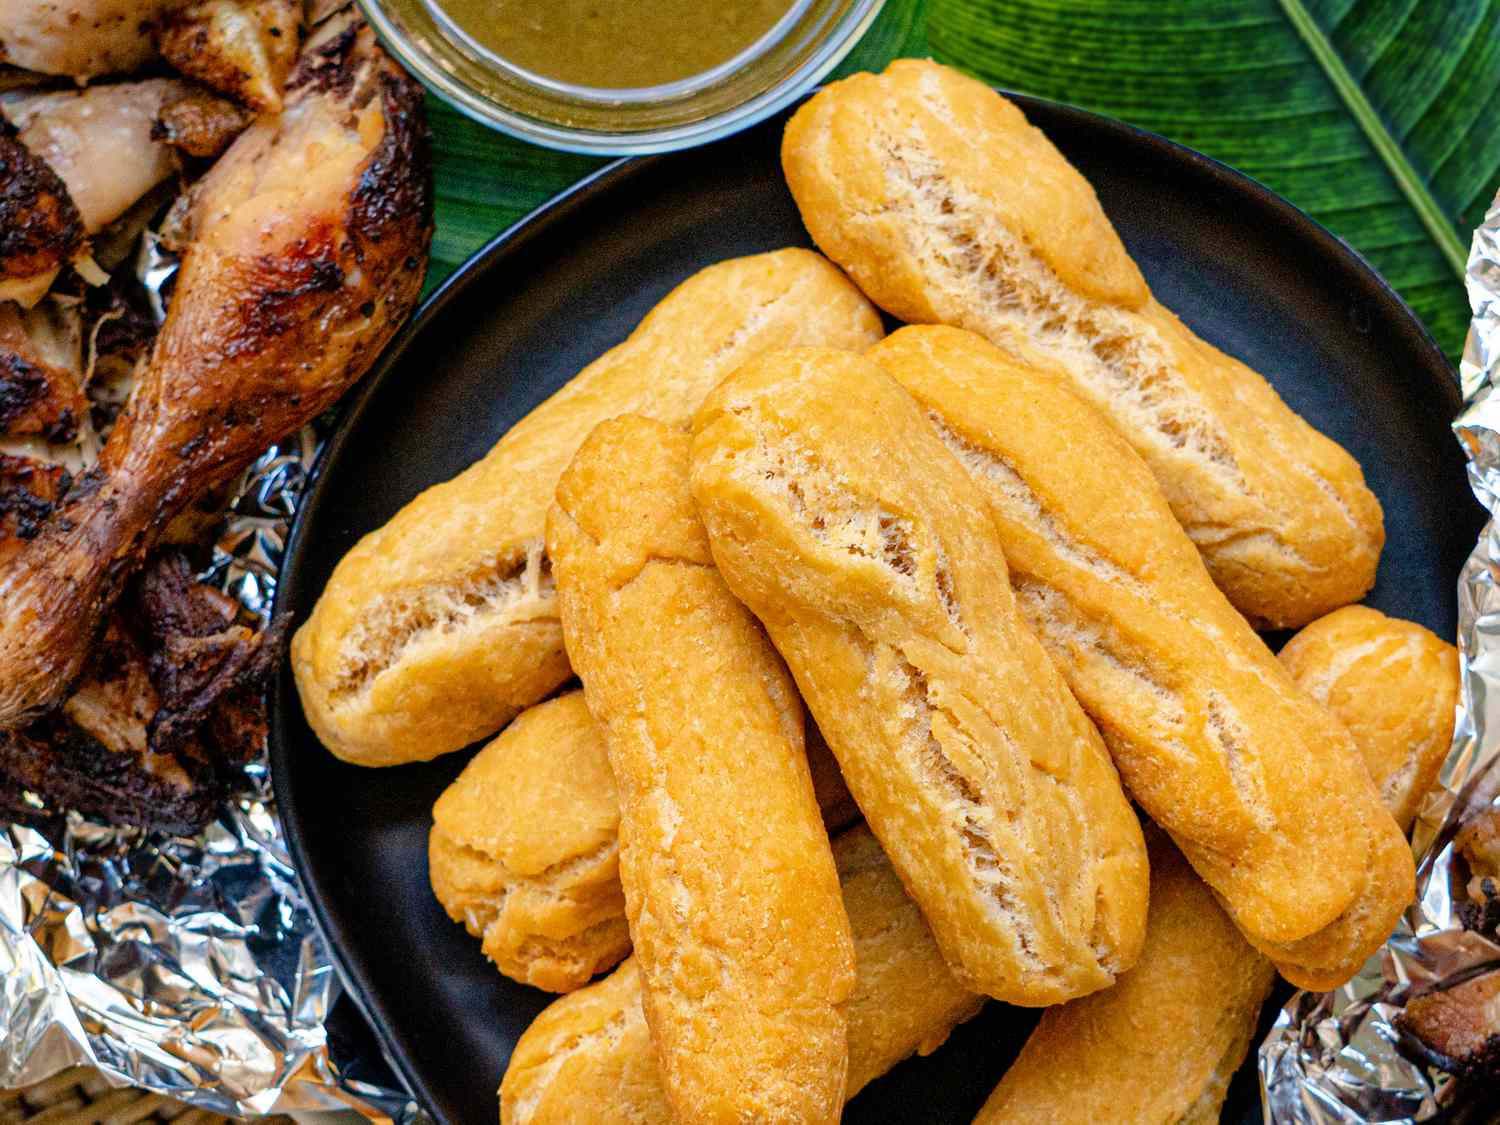 <p> Festival is a type of fried dough that's slightly sweet and crispy on the outside while soft on the inside. Made from cornmeal and flour, festival is often served alongside jerk chicken, fried fish, or ackee and saltfish. Its slightly sweet flavor and satisfying texture make it a popular accompaniment to many Jamaican dishes. </p> :: Serious Eats